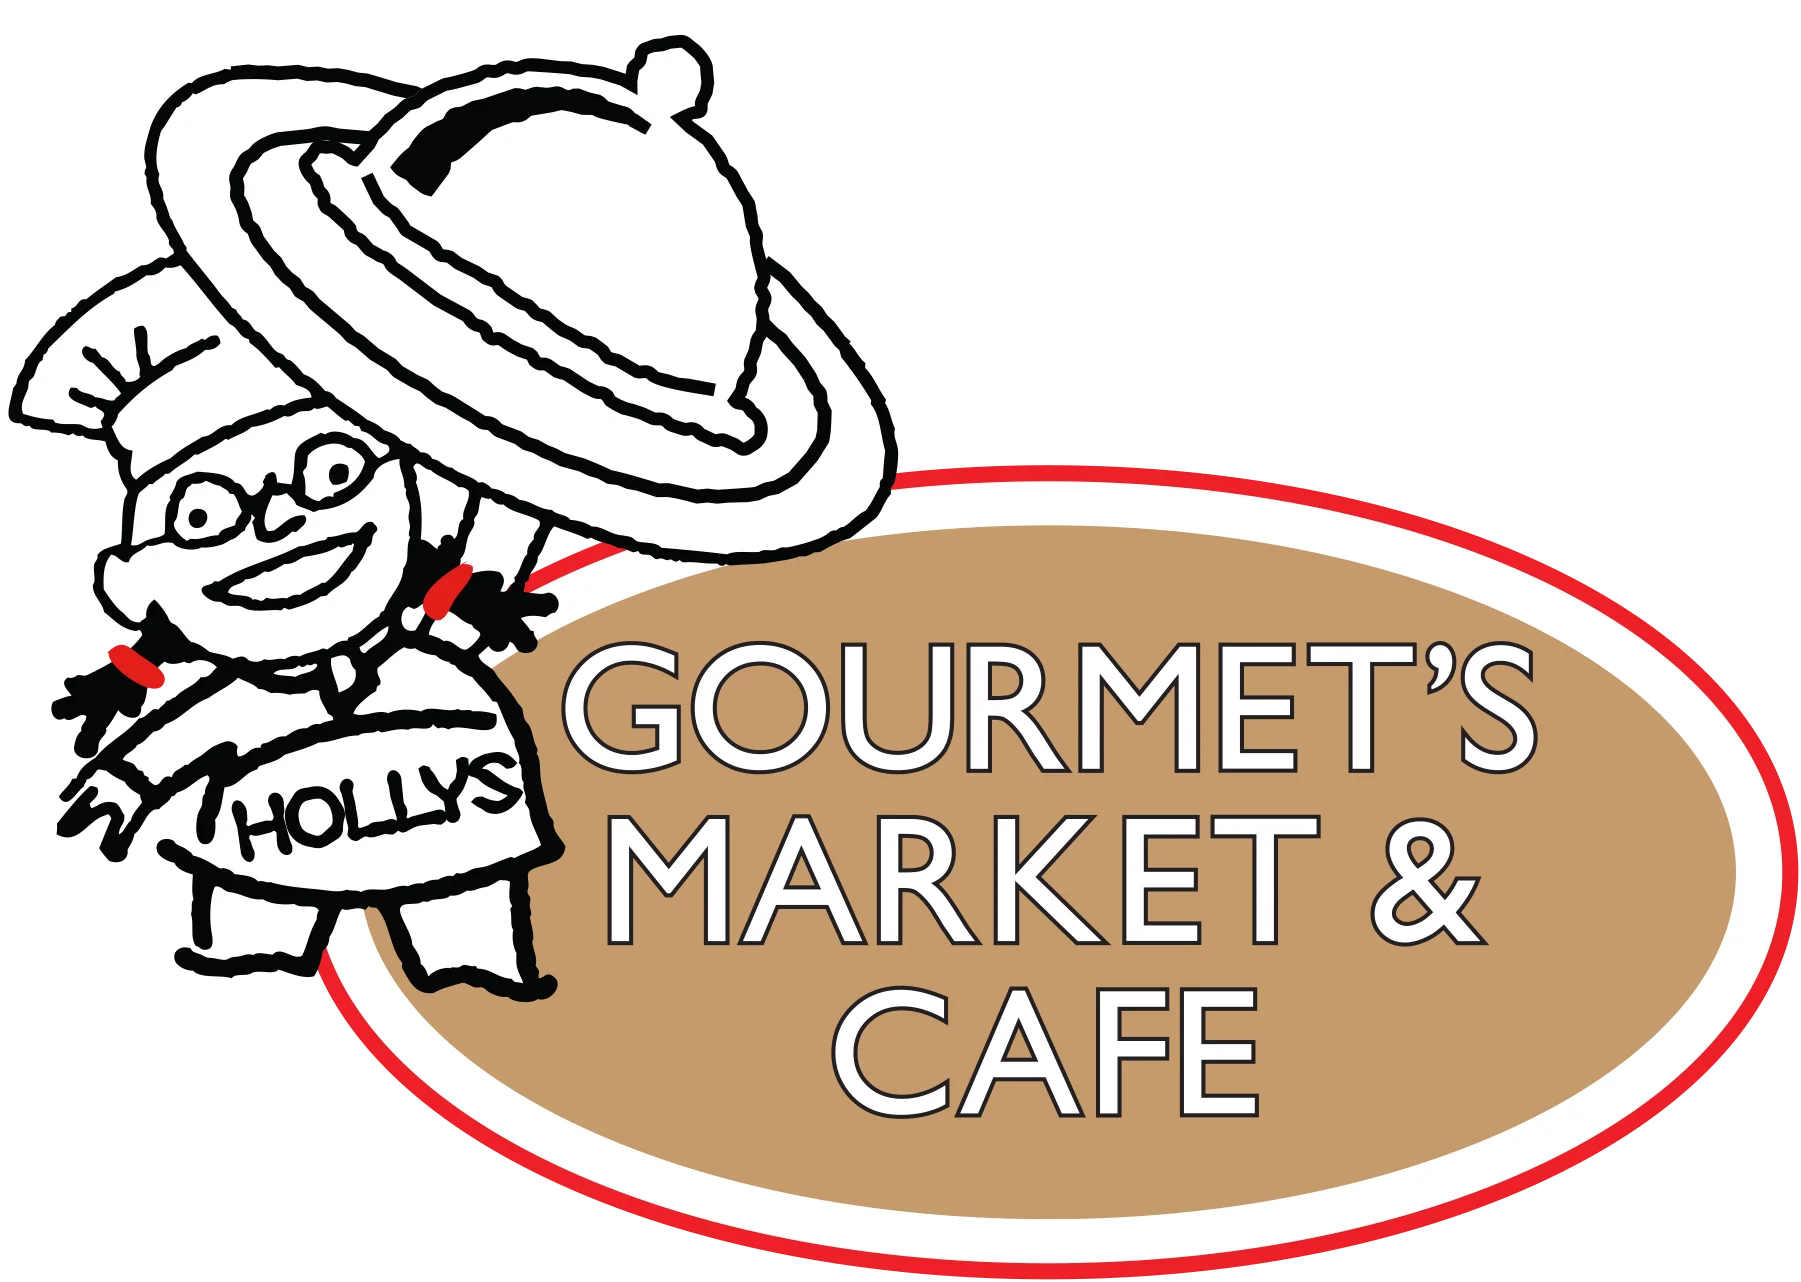 Holly's Gourmet Market and Cafe